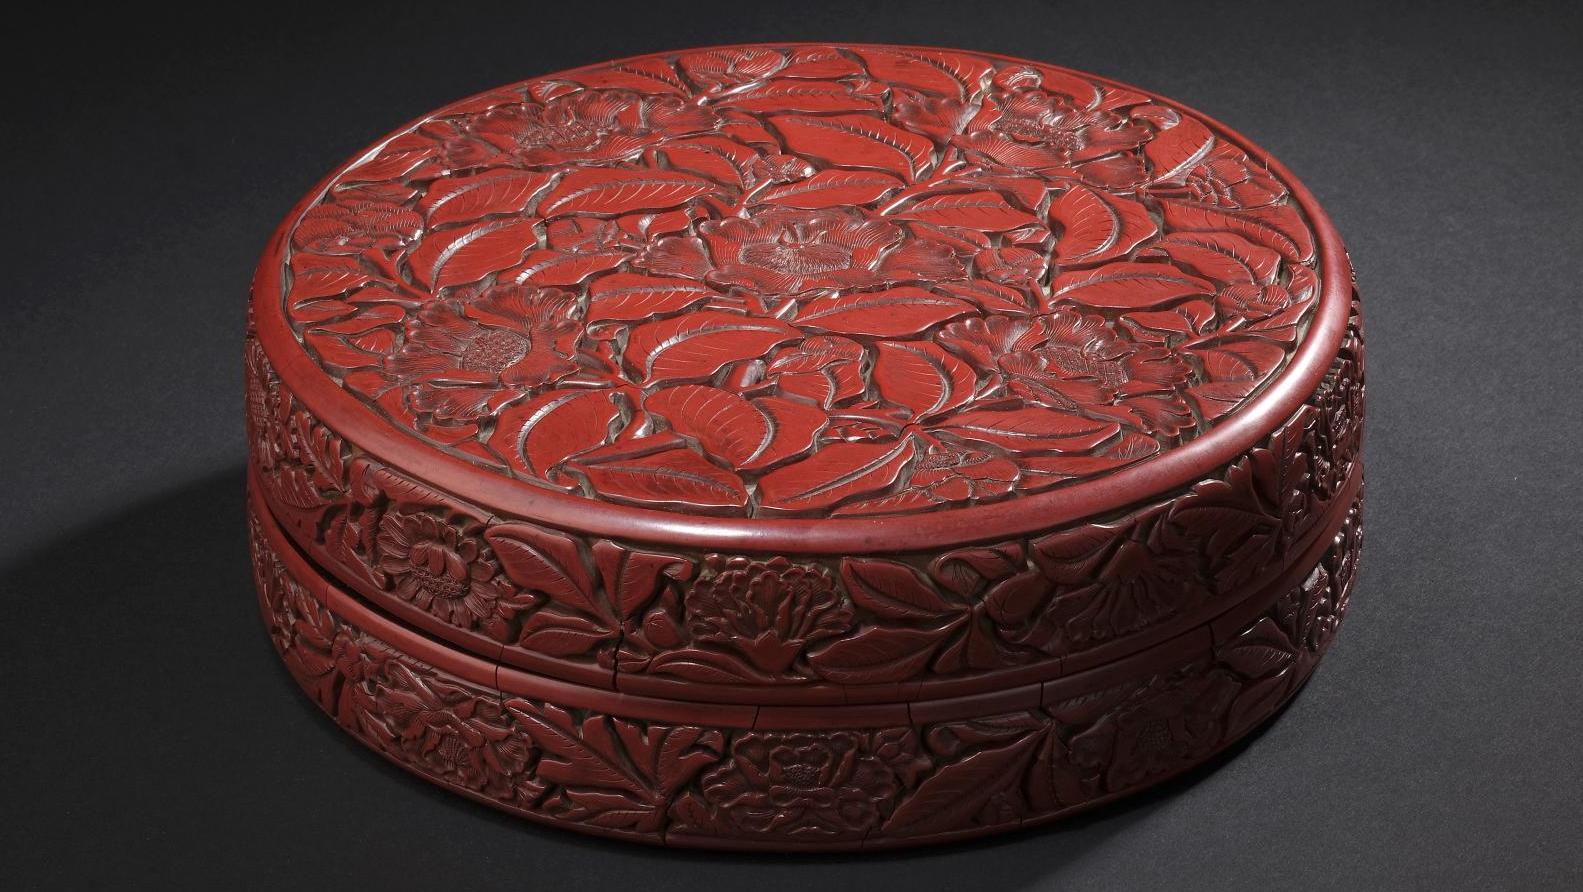 China, early 15th century, round red lacquer box carved with five camellia flowers... The Art of Lacquer Under Emperor Yongle: €2,060,800